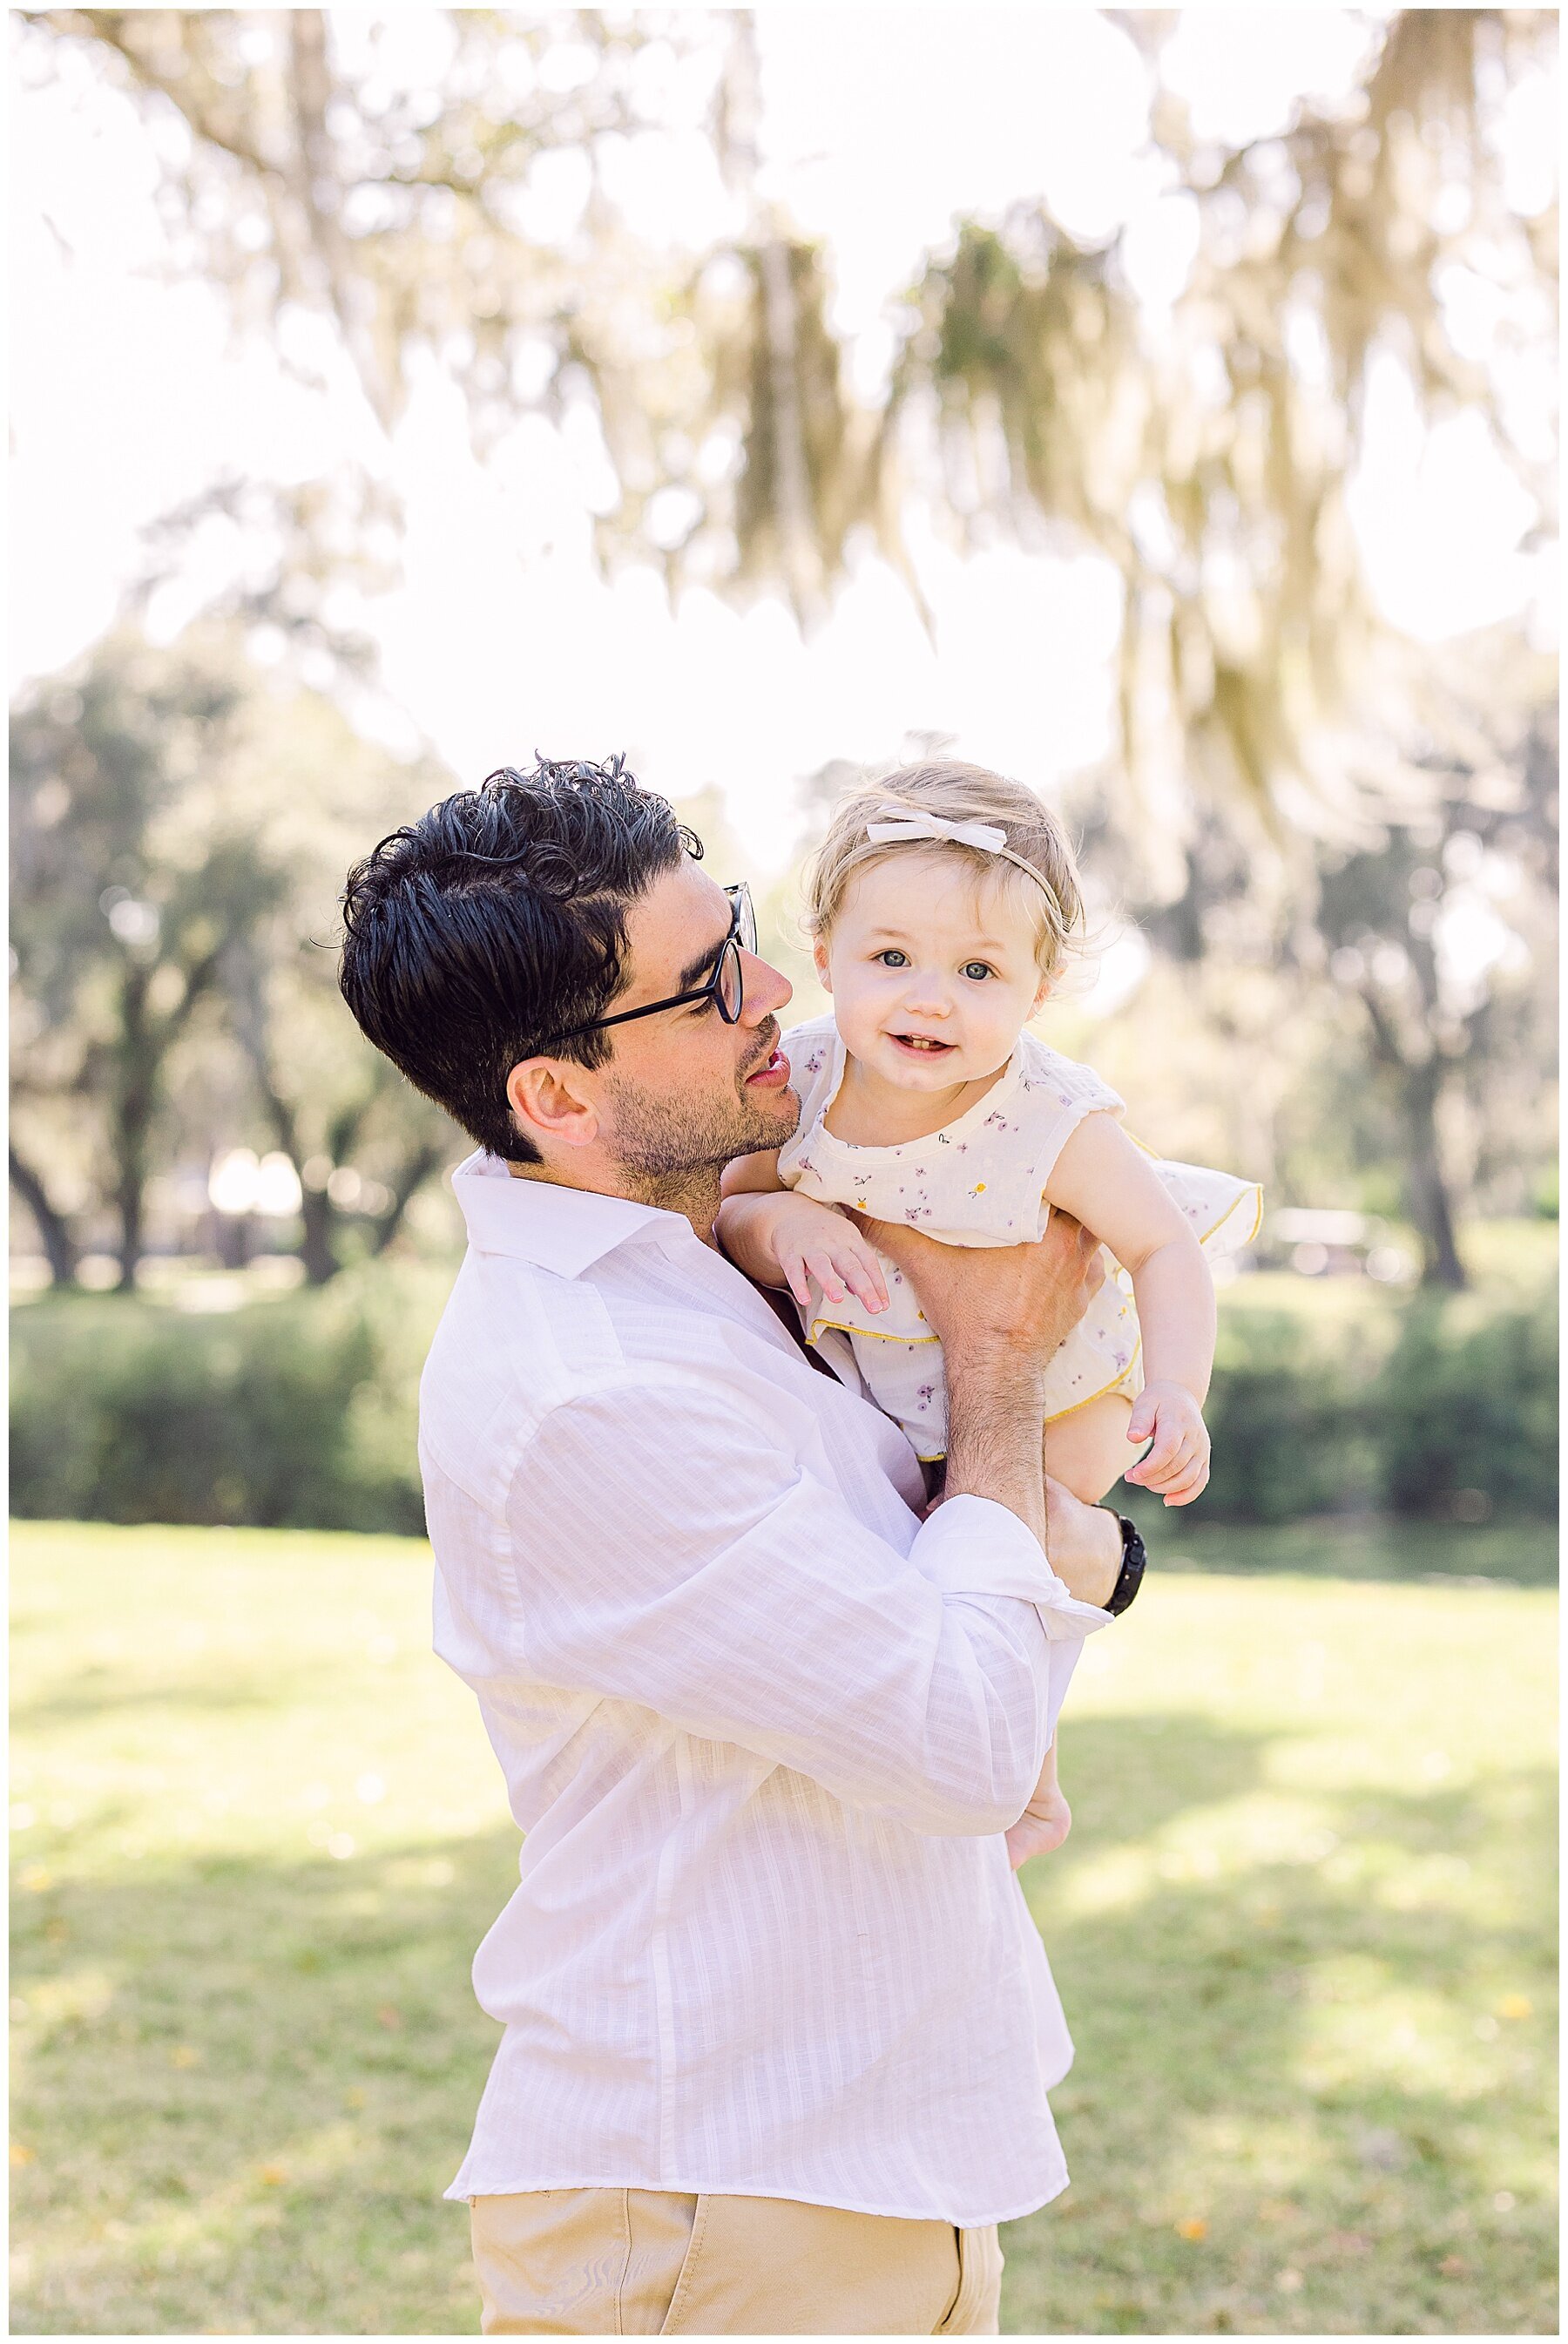 Katherine_Ives_Photography_Sallah_Palmetto_Bluff_Family_Session_28.JPG